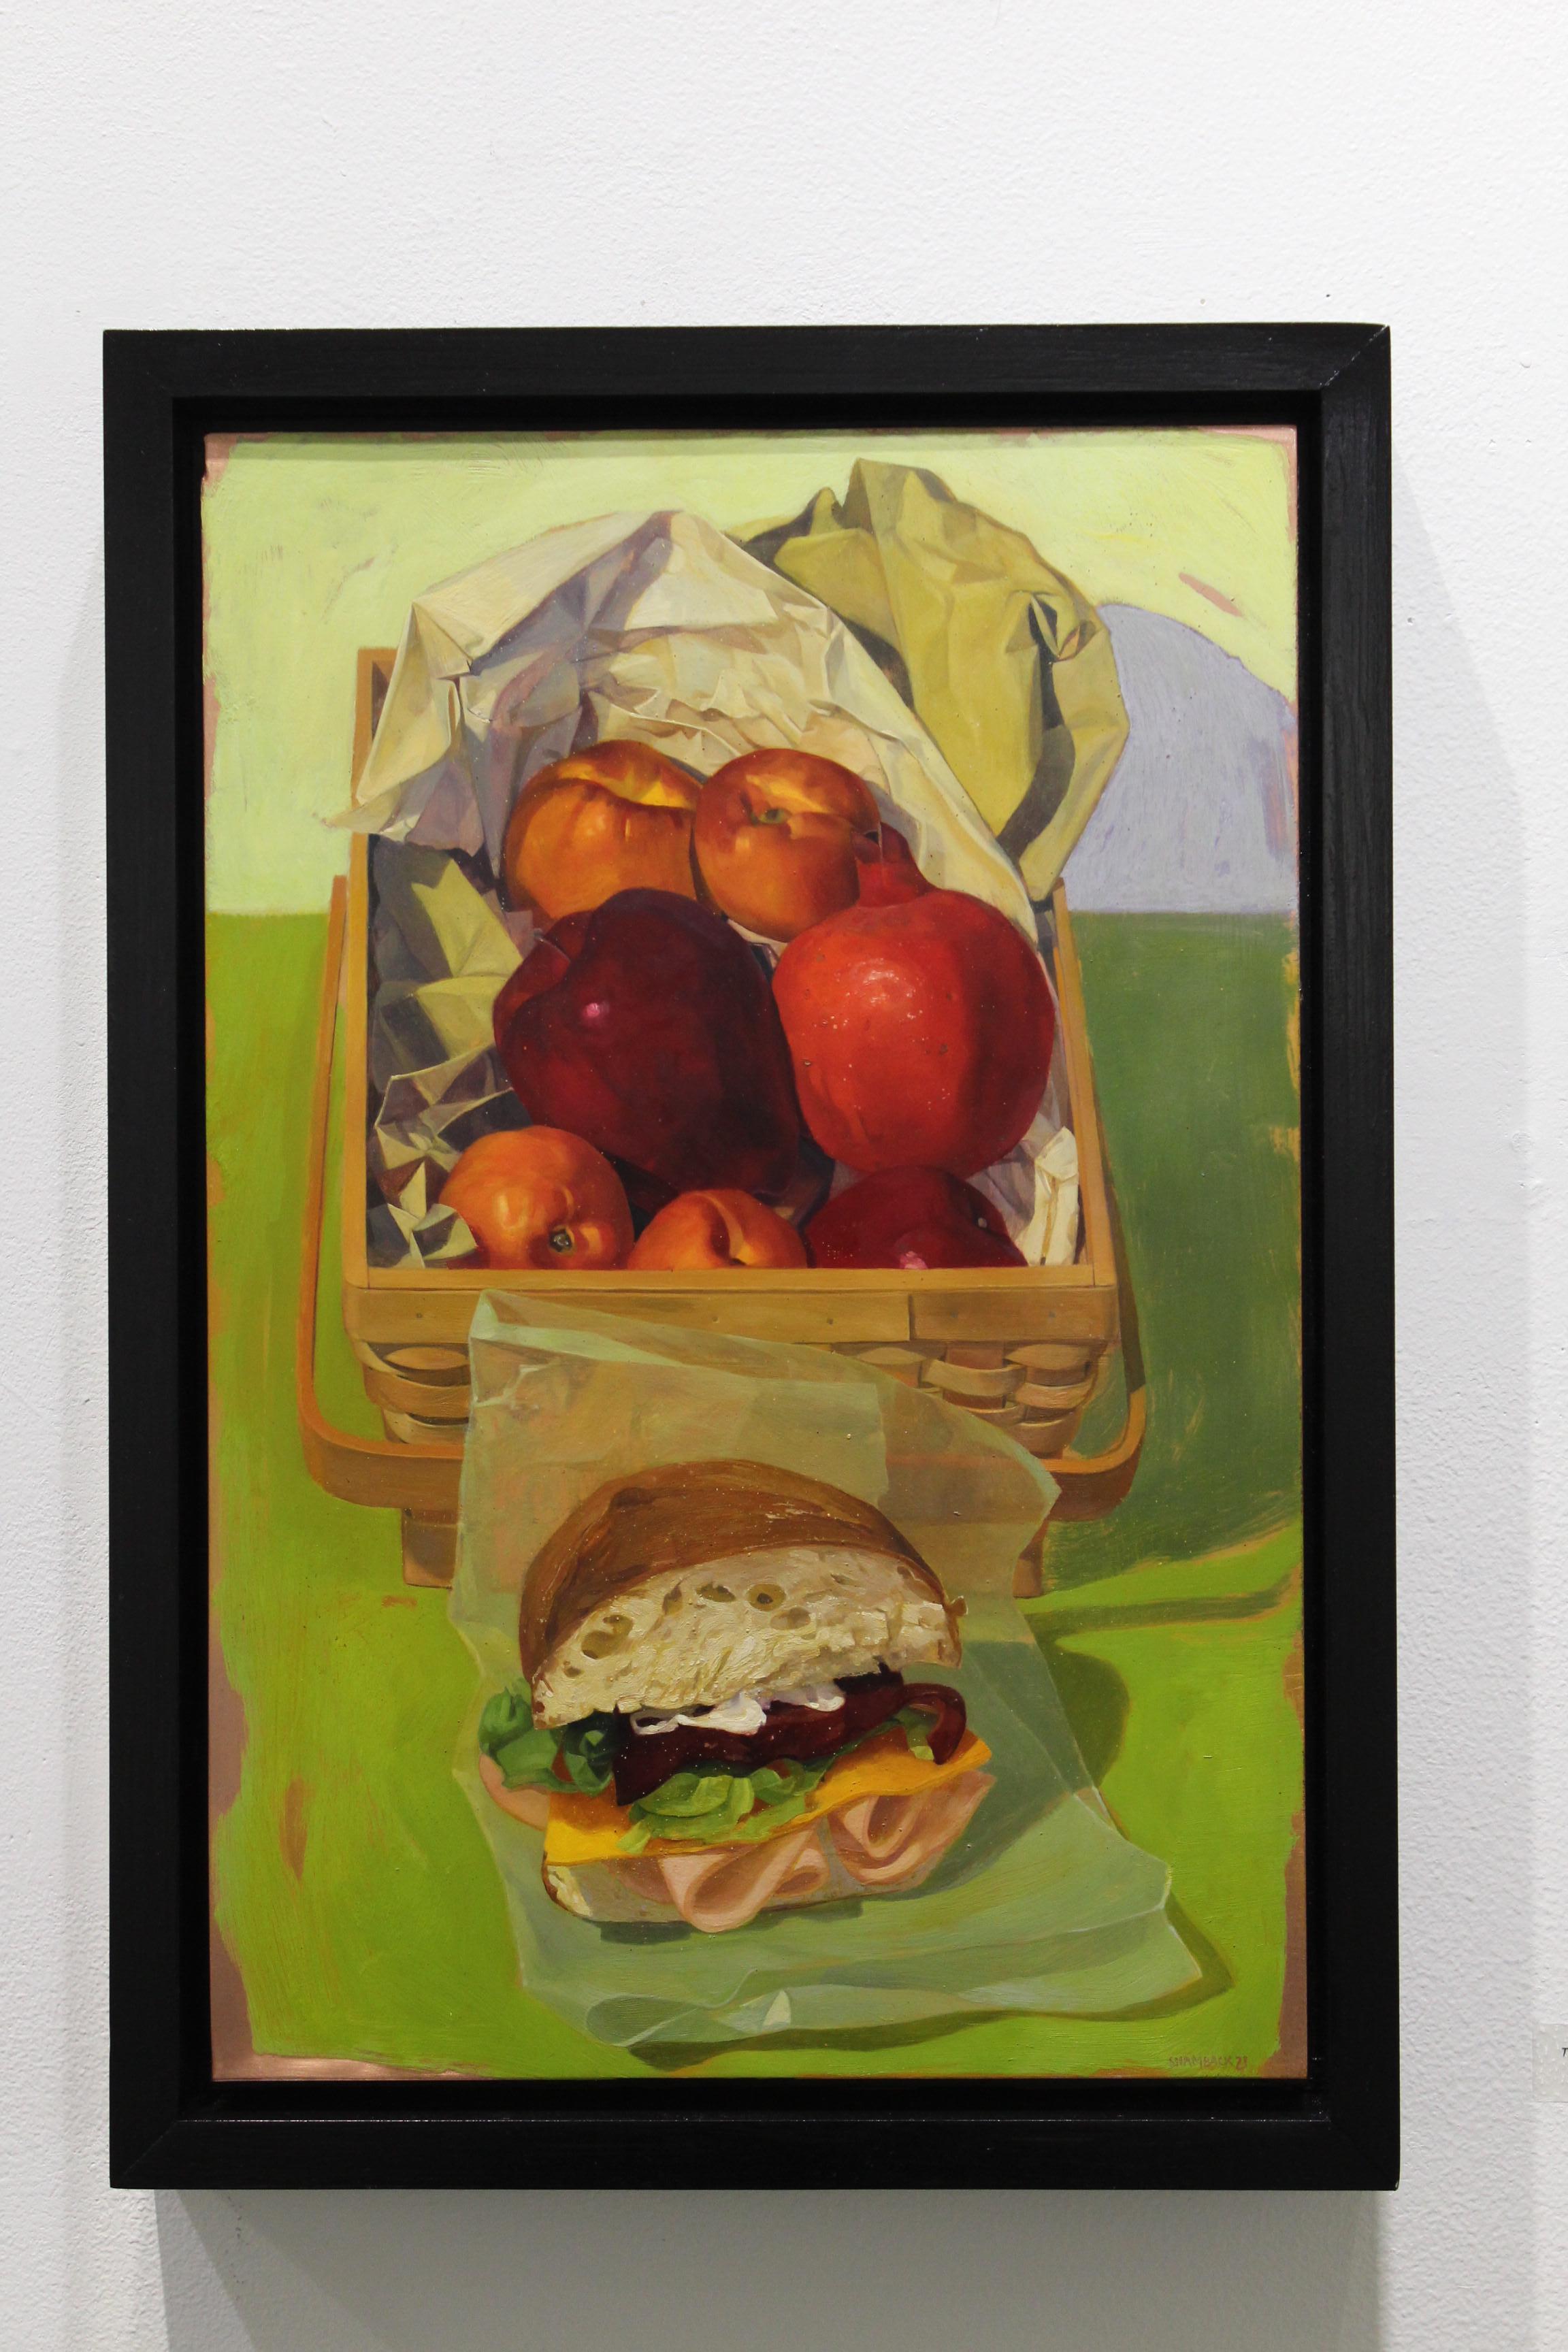 Turkey Sandwich with Apples - Painting by Benjamin Shamback